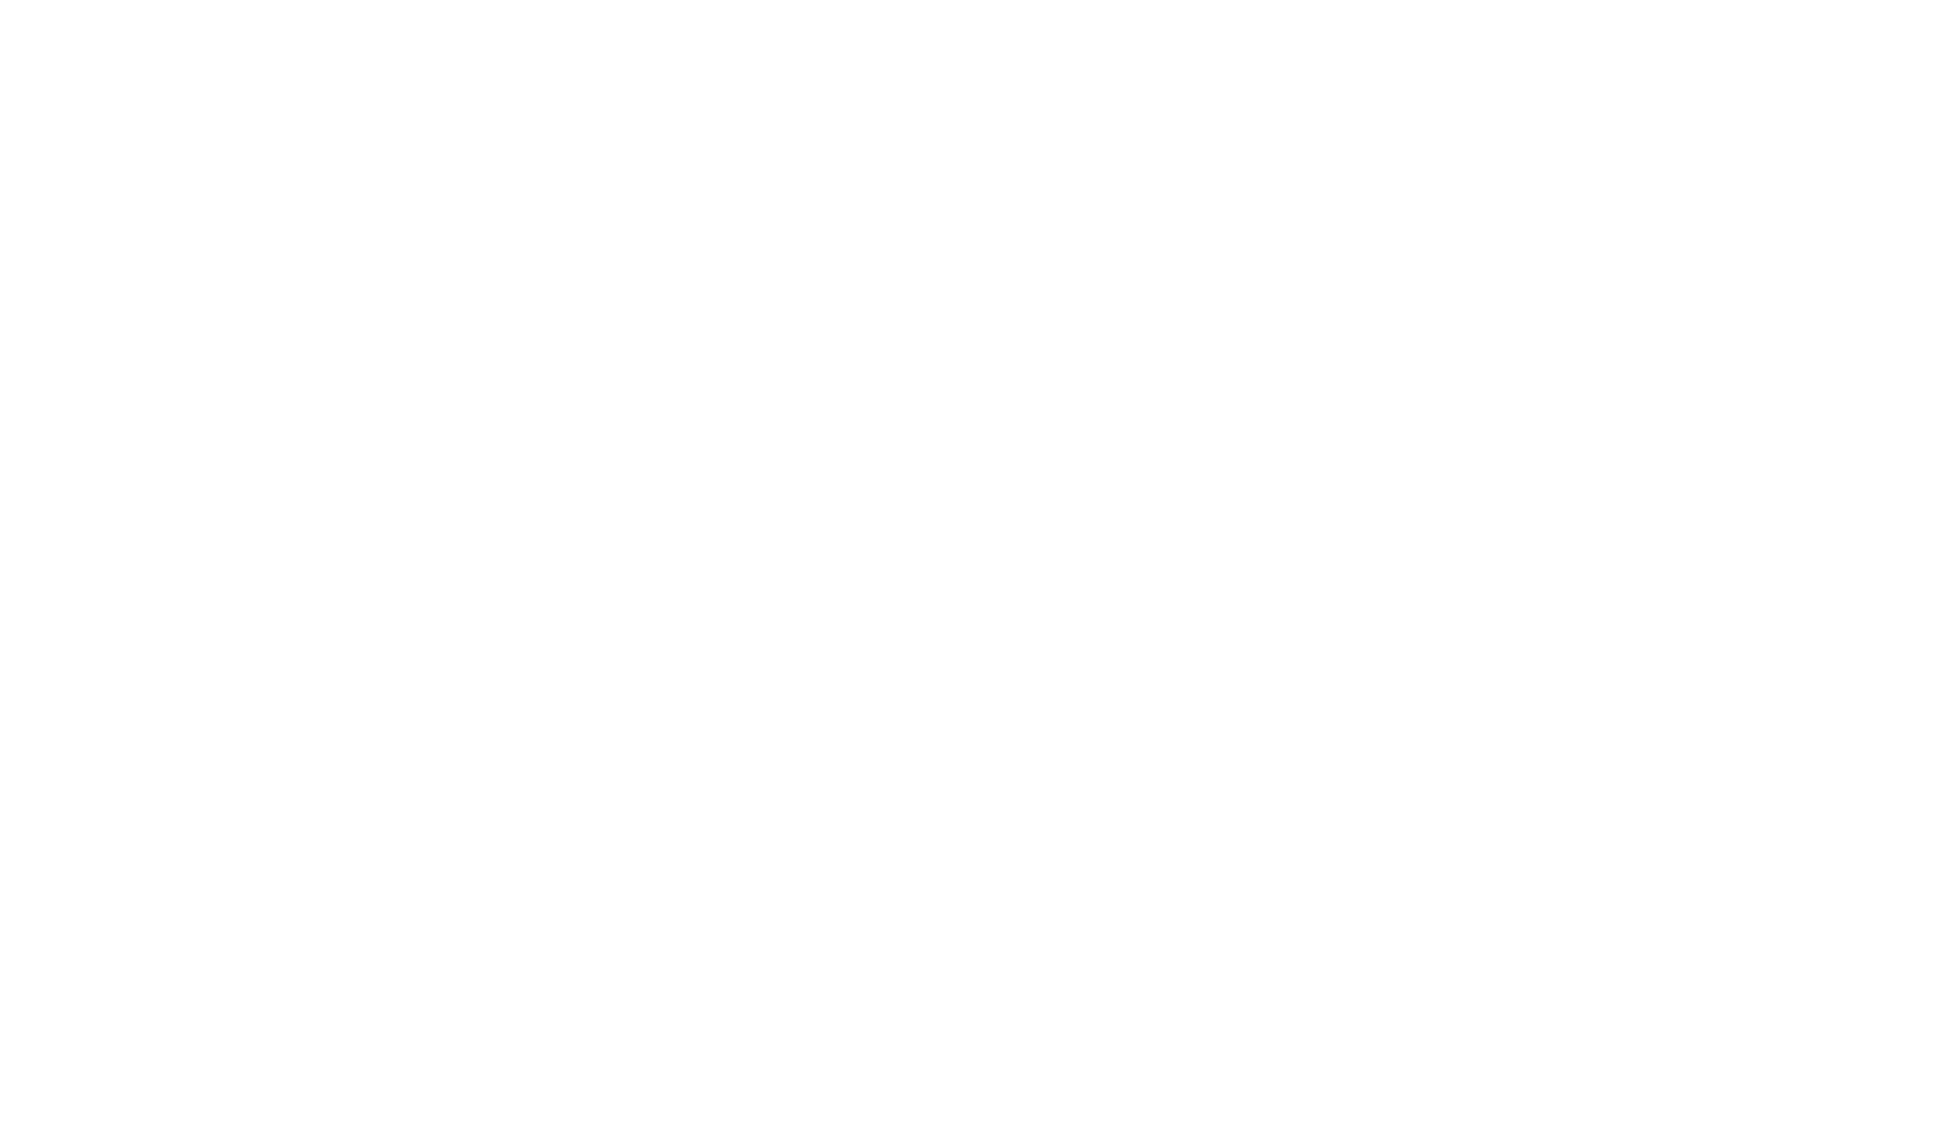 MSP 501 - The Miller Group